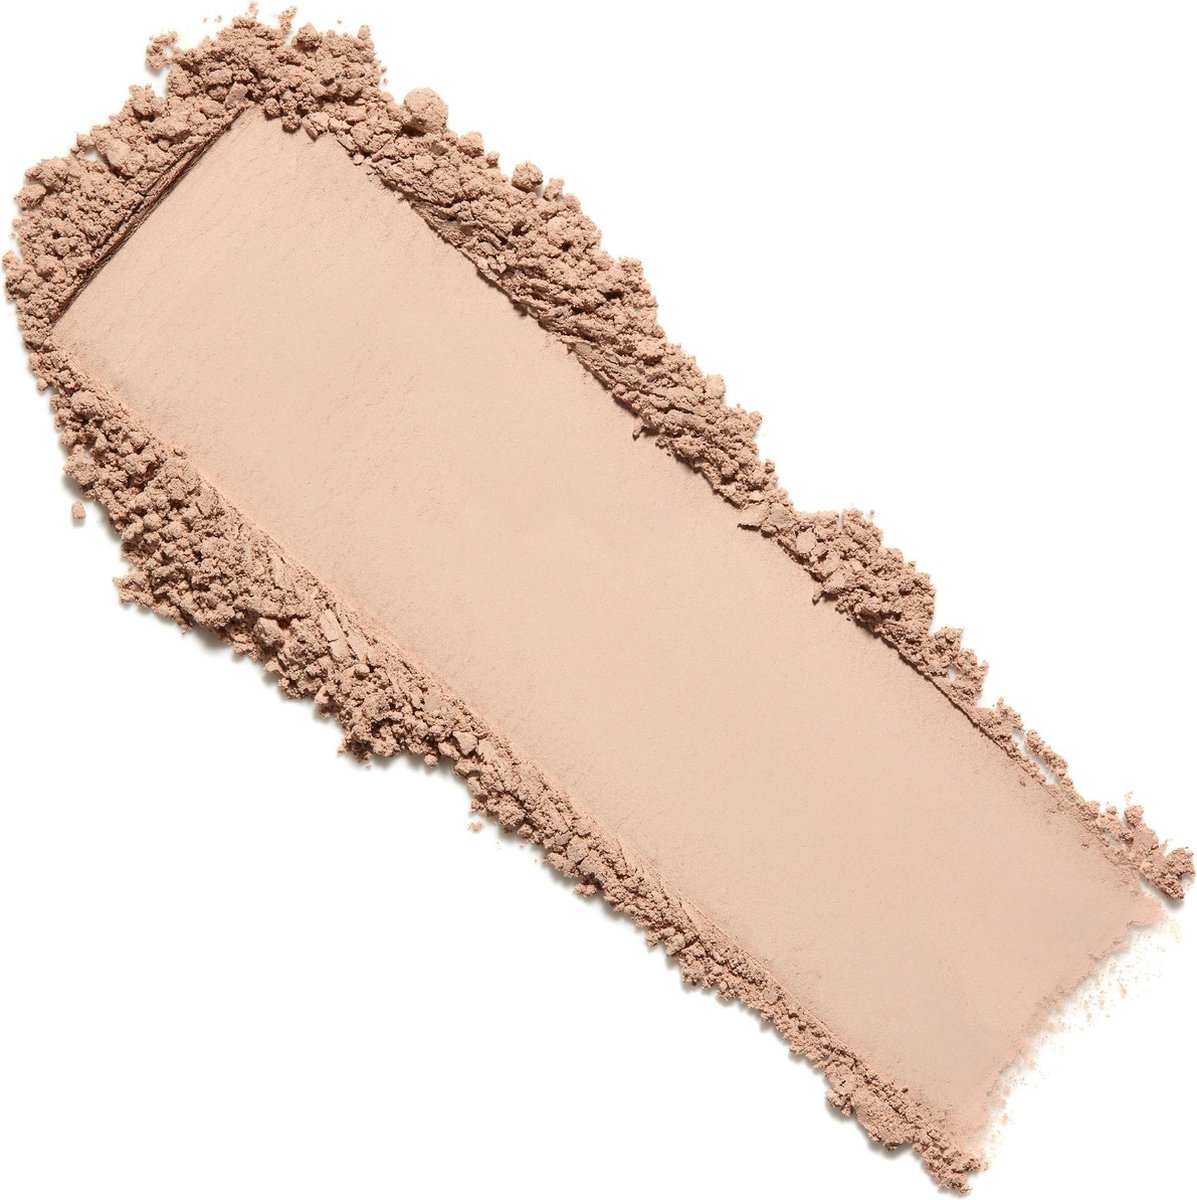 Lily Lolo Mineral Foundation SPF 15 Popsicle